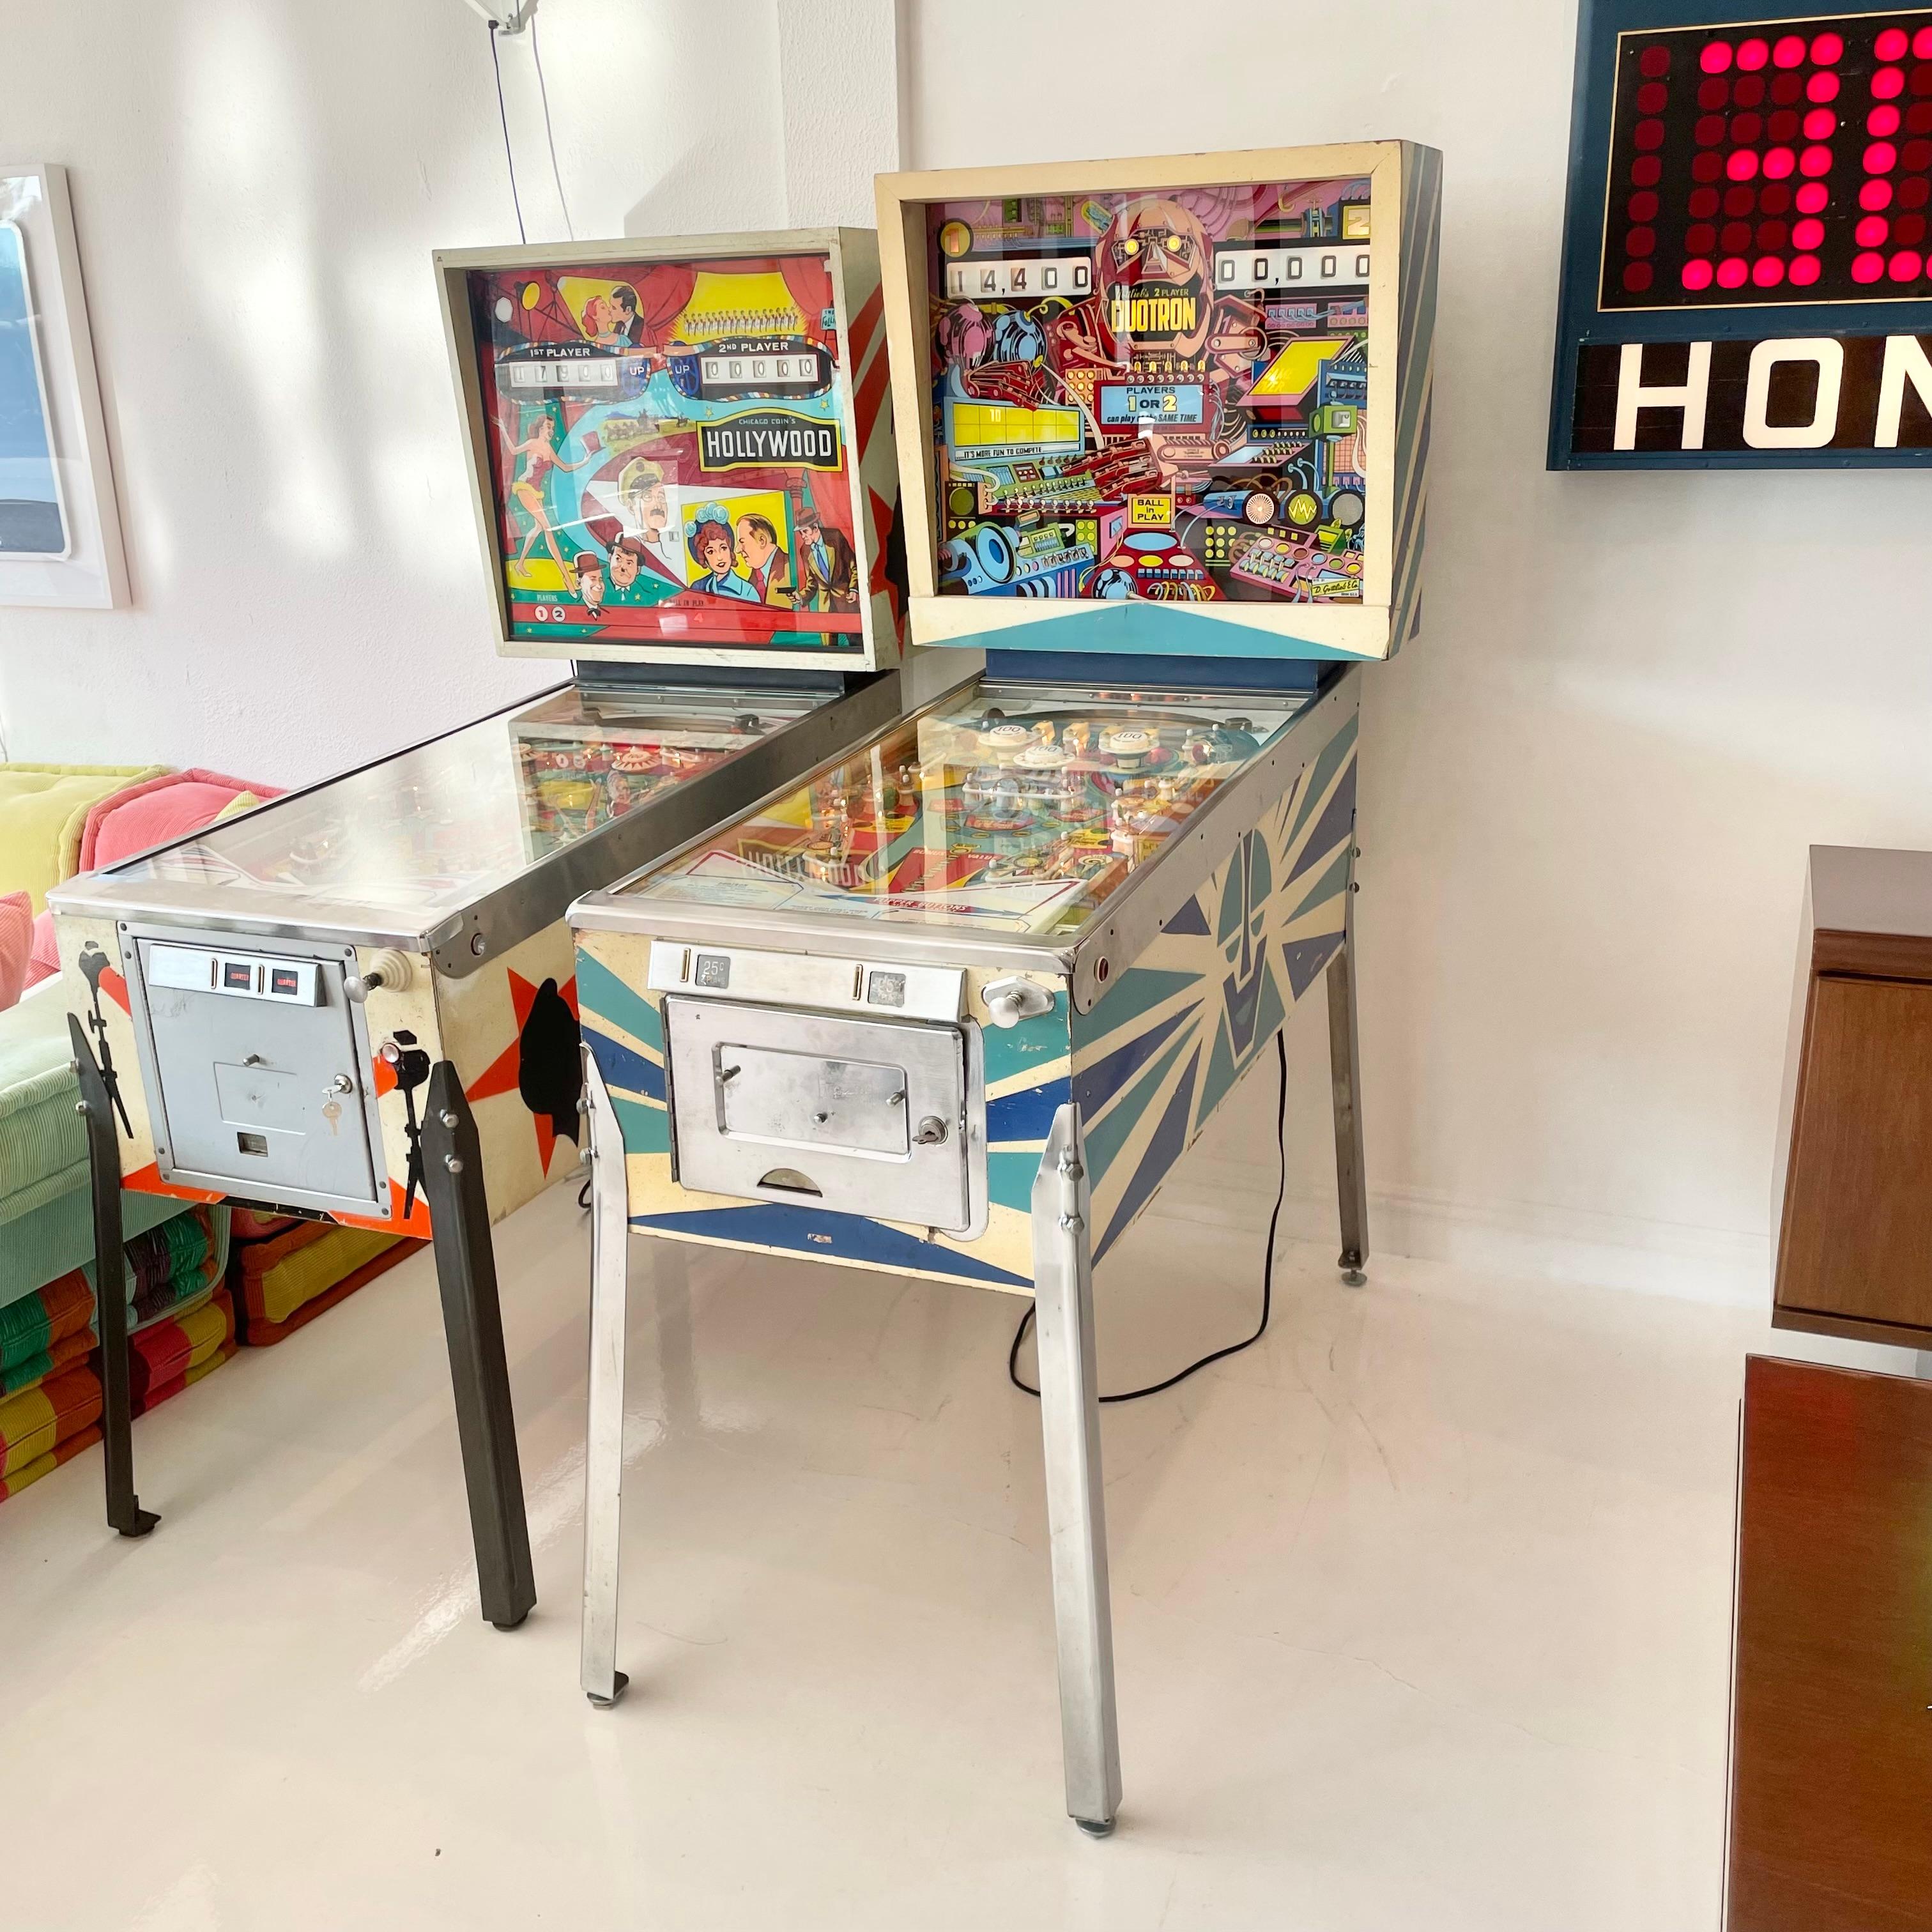 Vintage 'DUOTRON' pinball machine from 1974. Made by D. Gottlieb & Co. and designed by Ed Krynski and with art by Gordon Morison. In excellent working condition. Great visuals and sounds. Extremely fast paced game speed and very fun to play. This